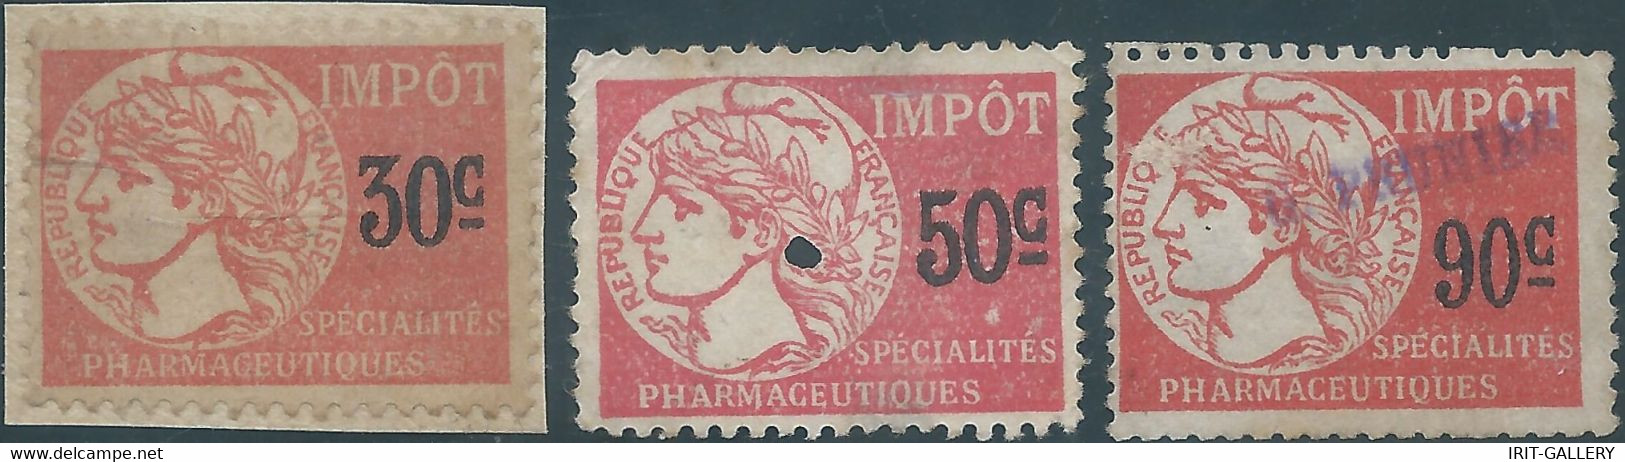 FRANCE,Revenue Stamps Fiscal Tax PHARMACEUTICAL SPECIALTIES,30-50-90c,Used - Zegels